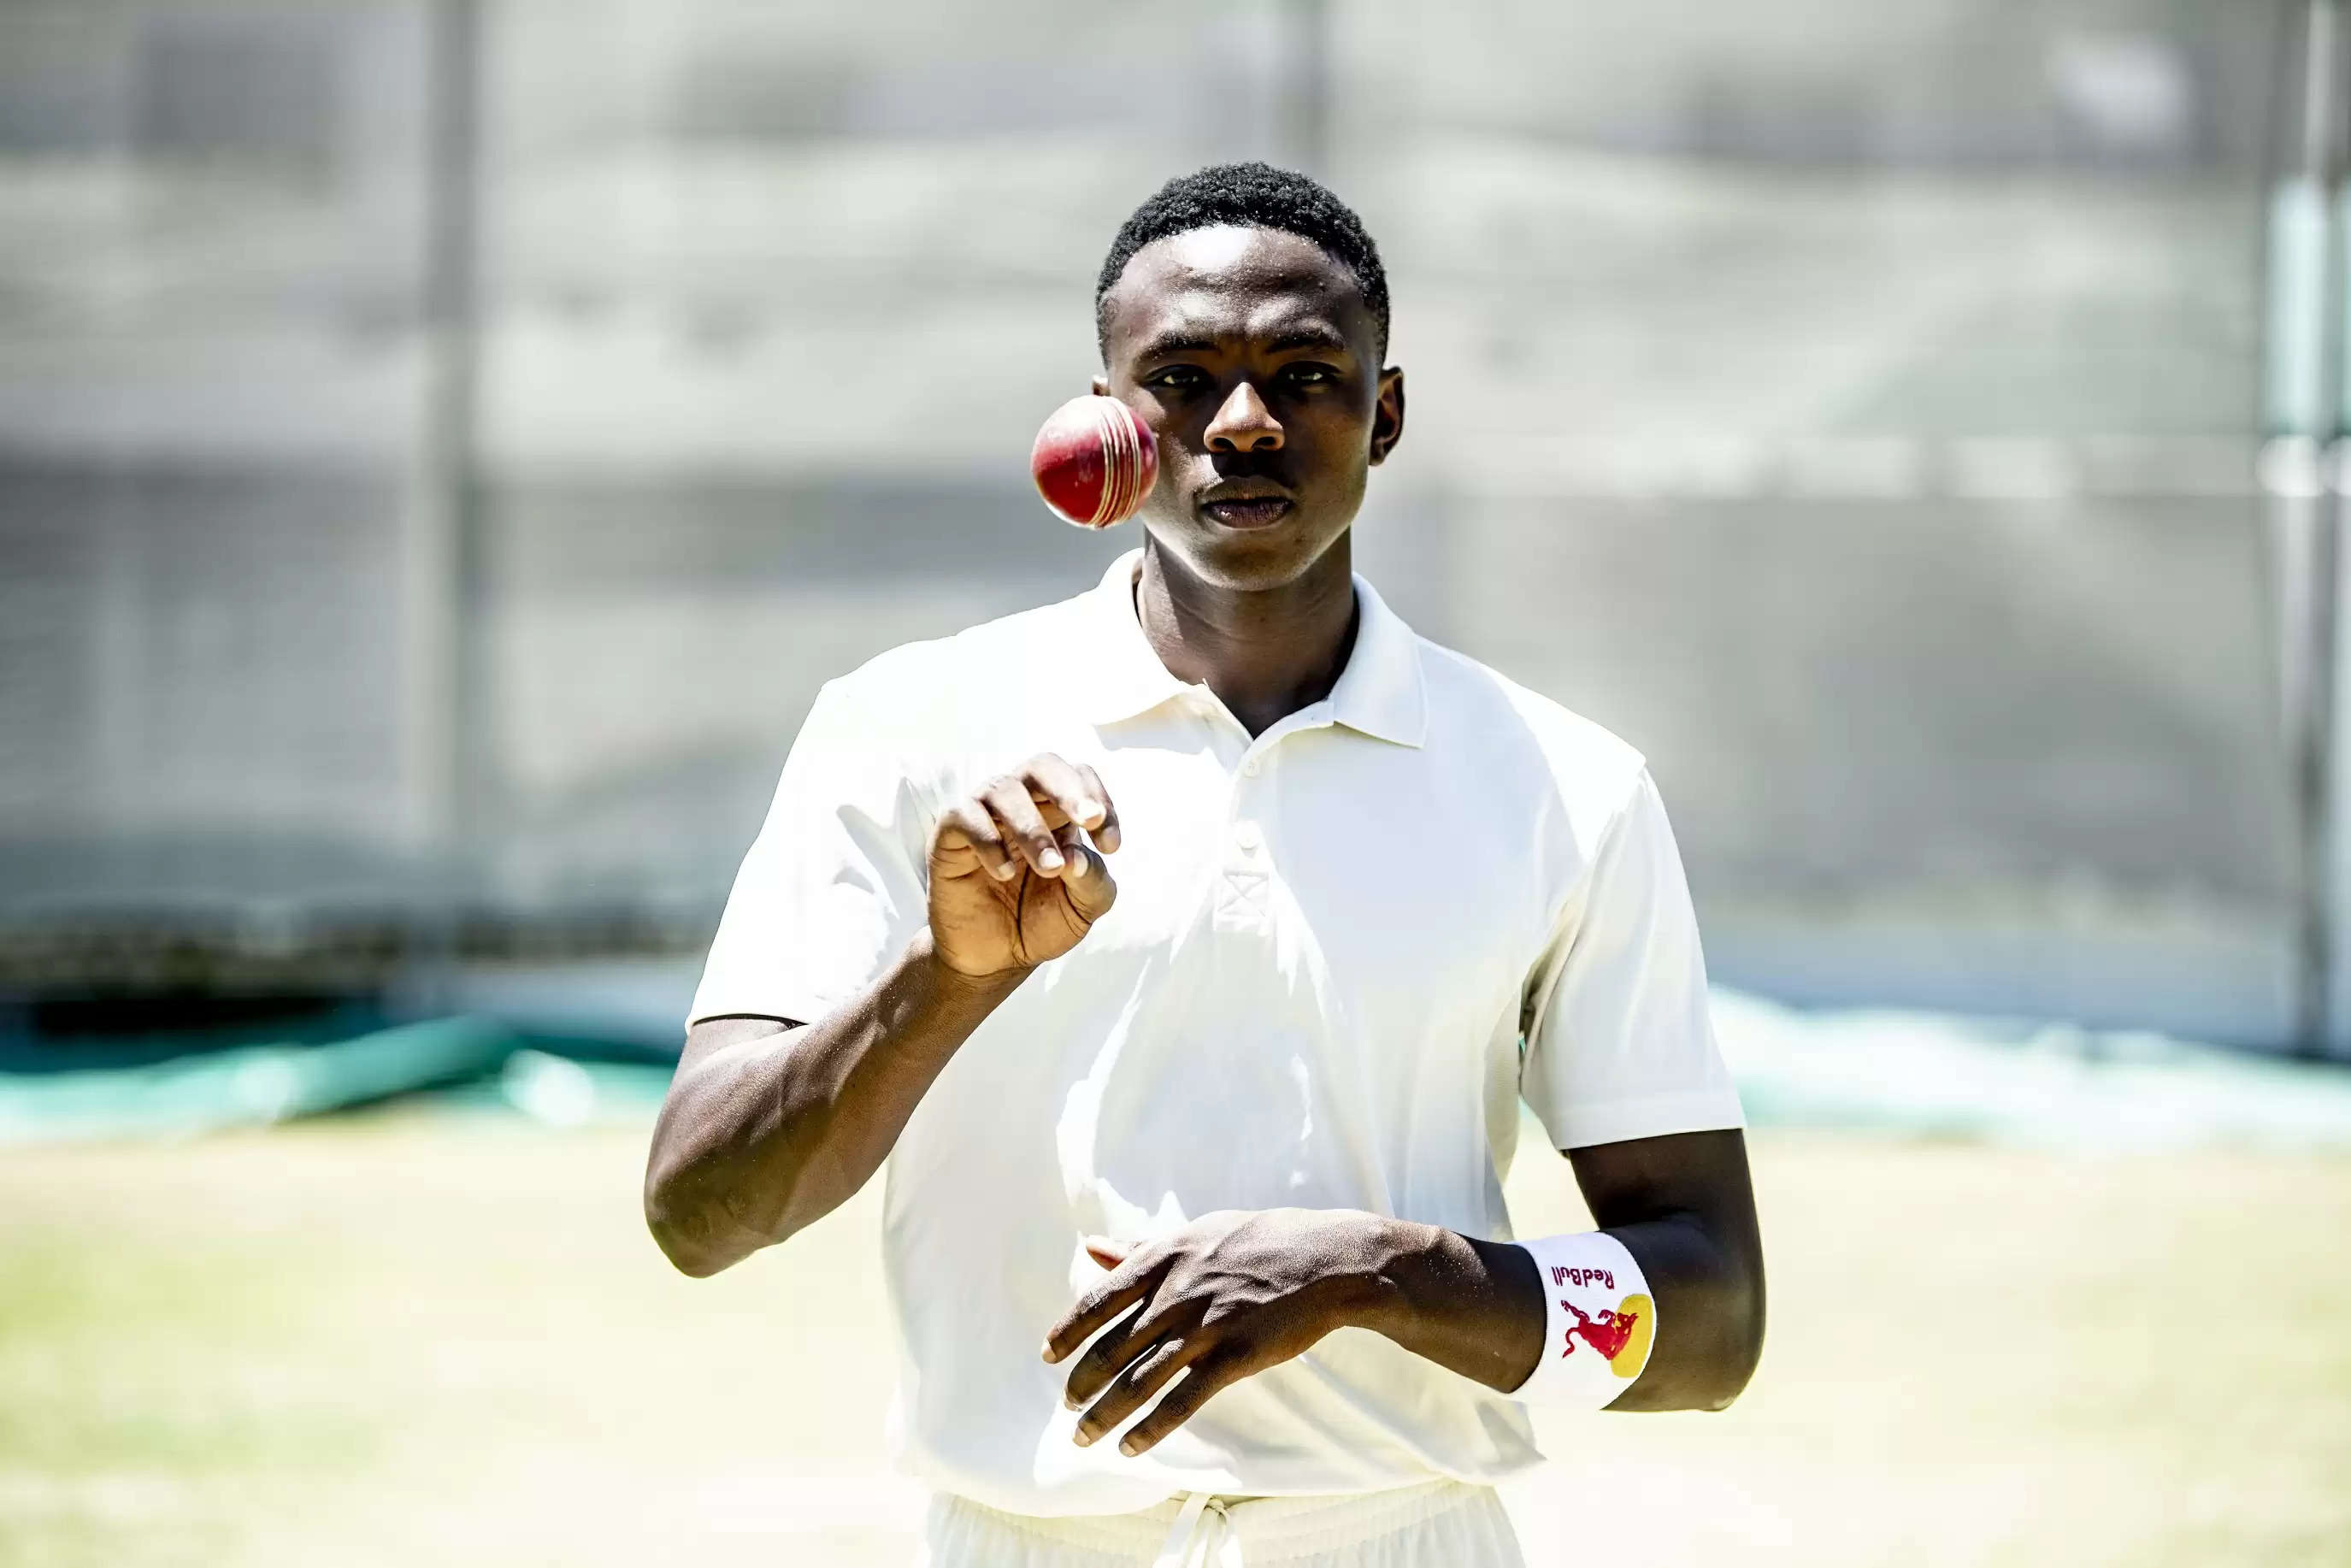 Red Bull ‘The Mind Behind’: Episode 3, Kagiso Rabada: “I don’t have grudges off the field”